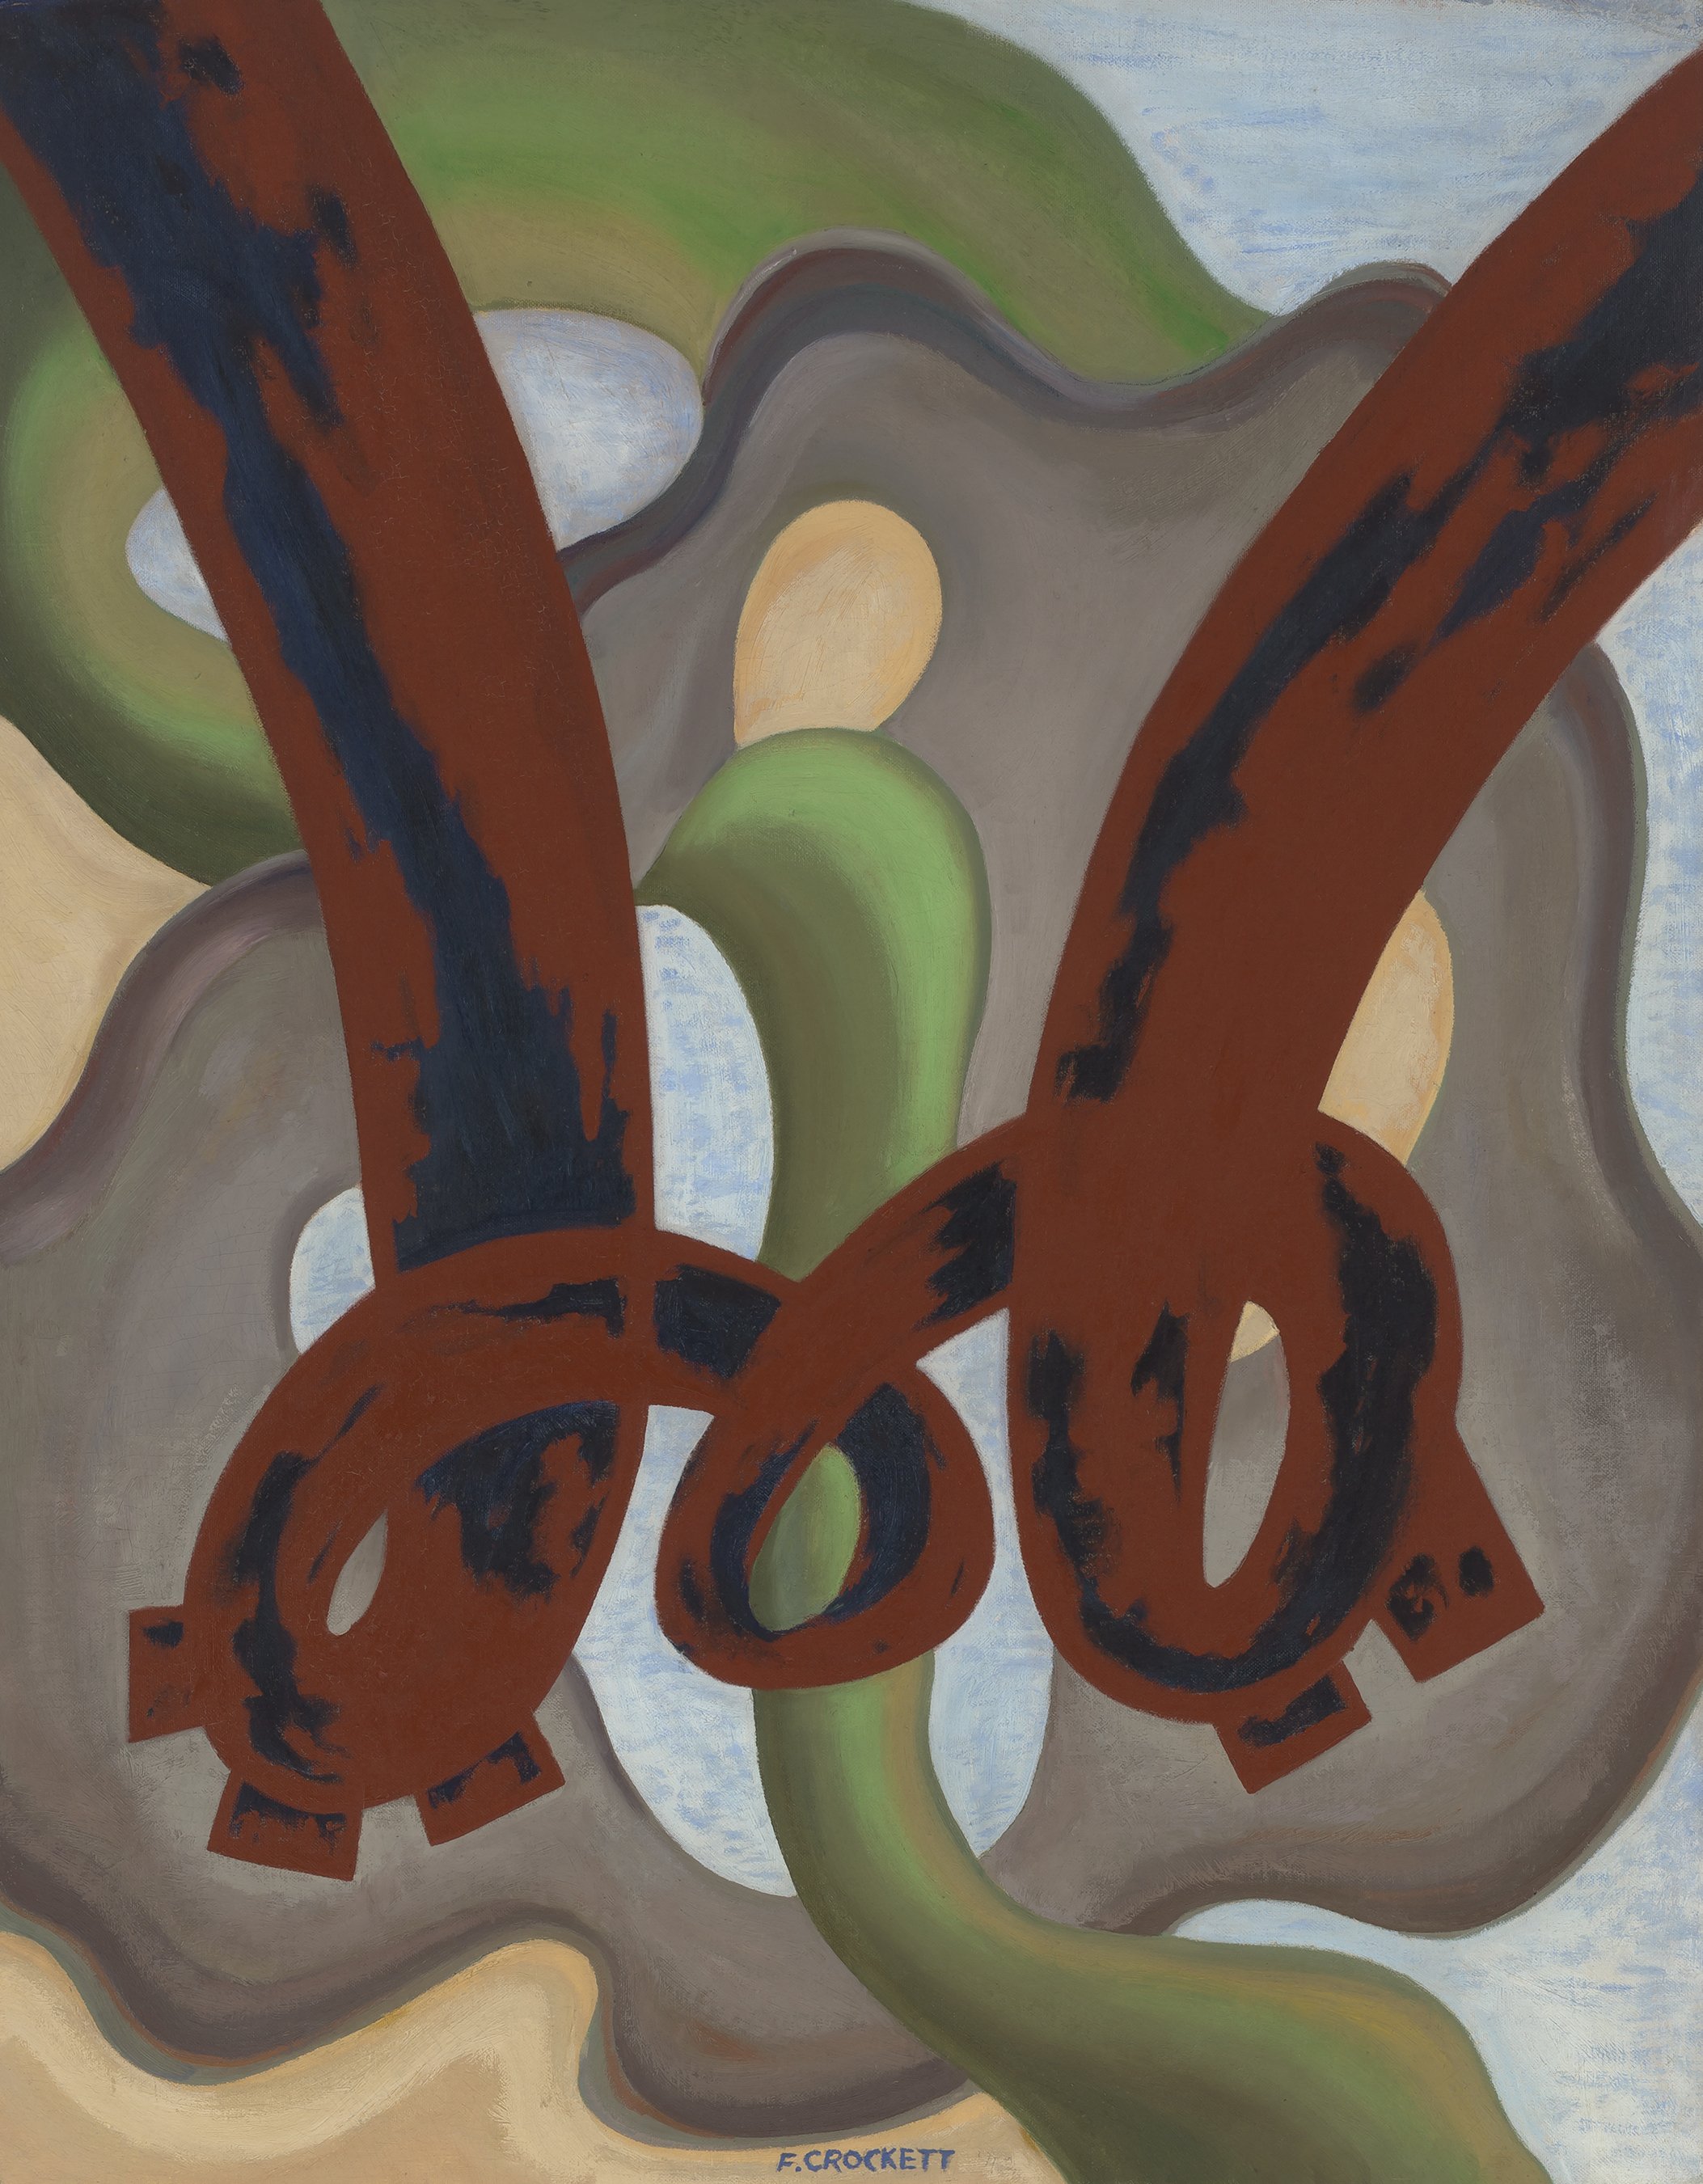 Biomorphic abstraction of abutted amorphous shapes in grey, red-brown, green, blue, and peach.